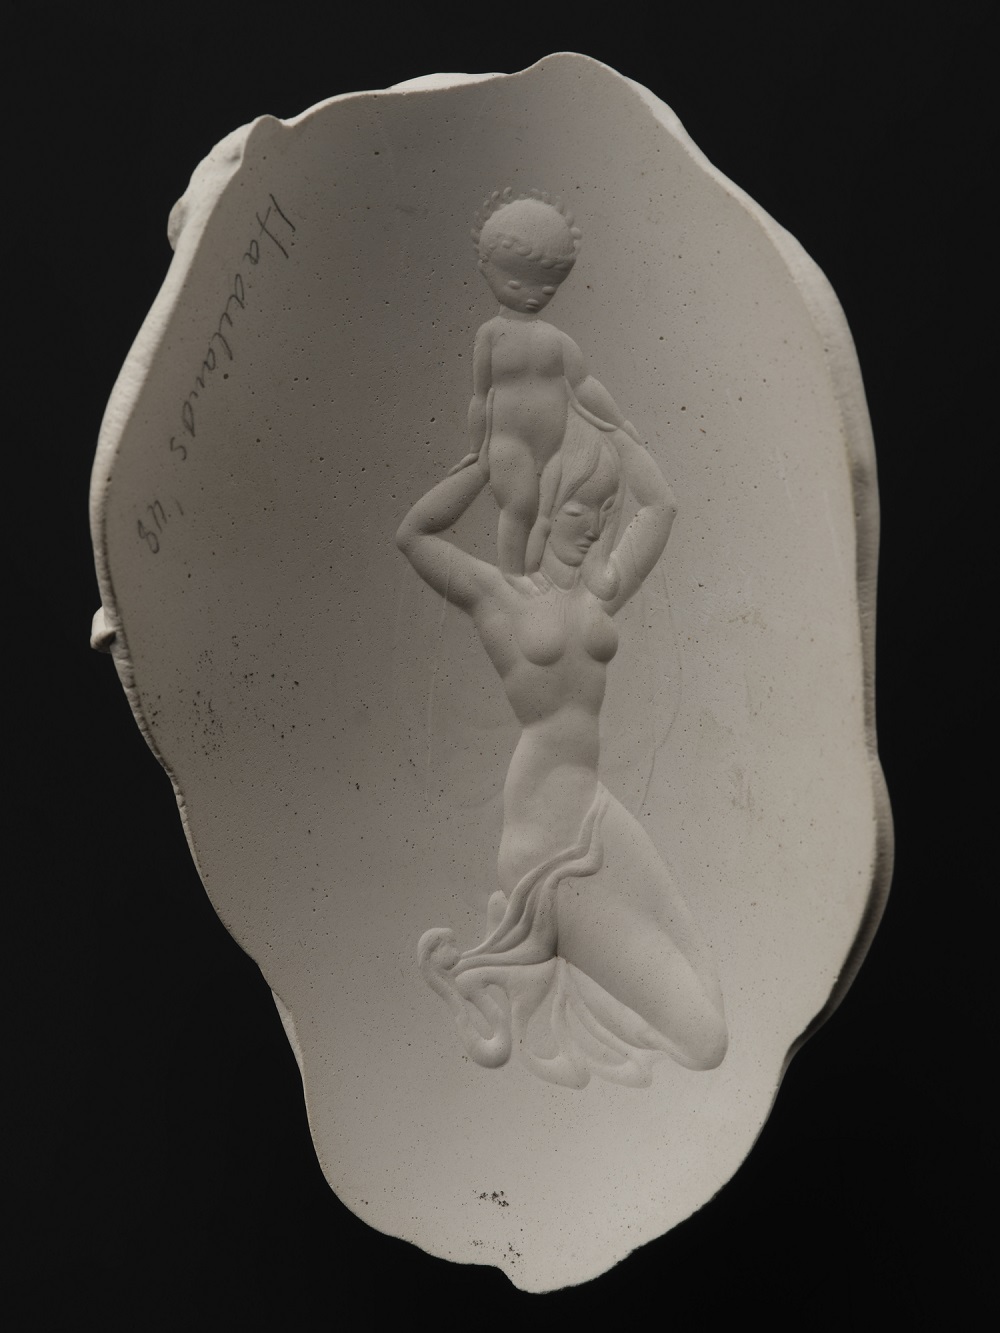 A white ceramic fragment shaped like an egg with wavy edges against a black background. On the white surface is a raised carving of a nude woman kneeling and holding a nude child on her shoulders. The child is wearing a laurel crown, and the woman has a cloth draped across her waist.